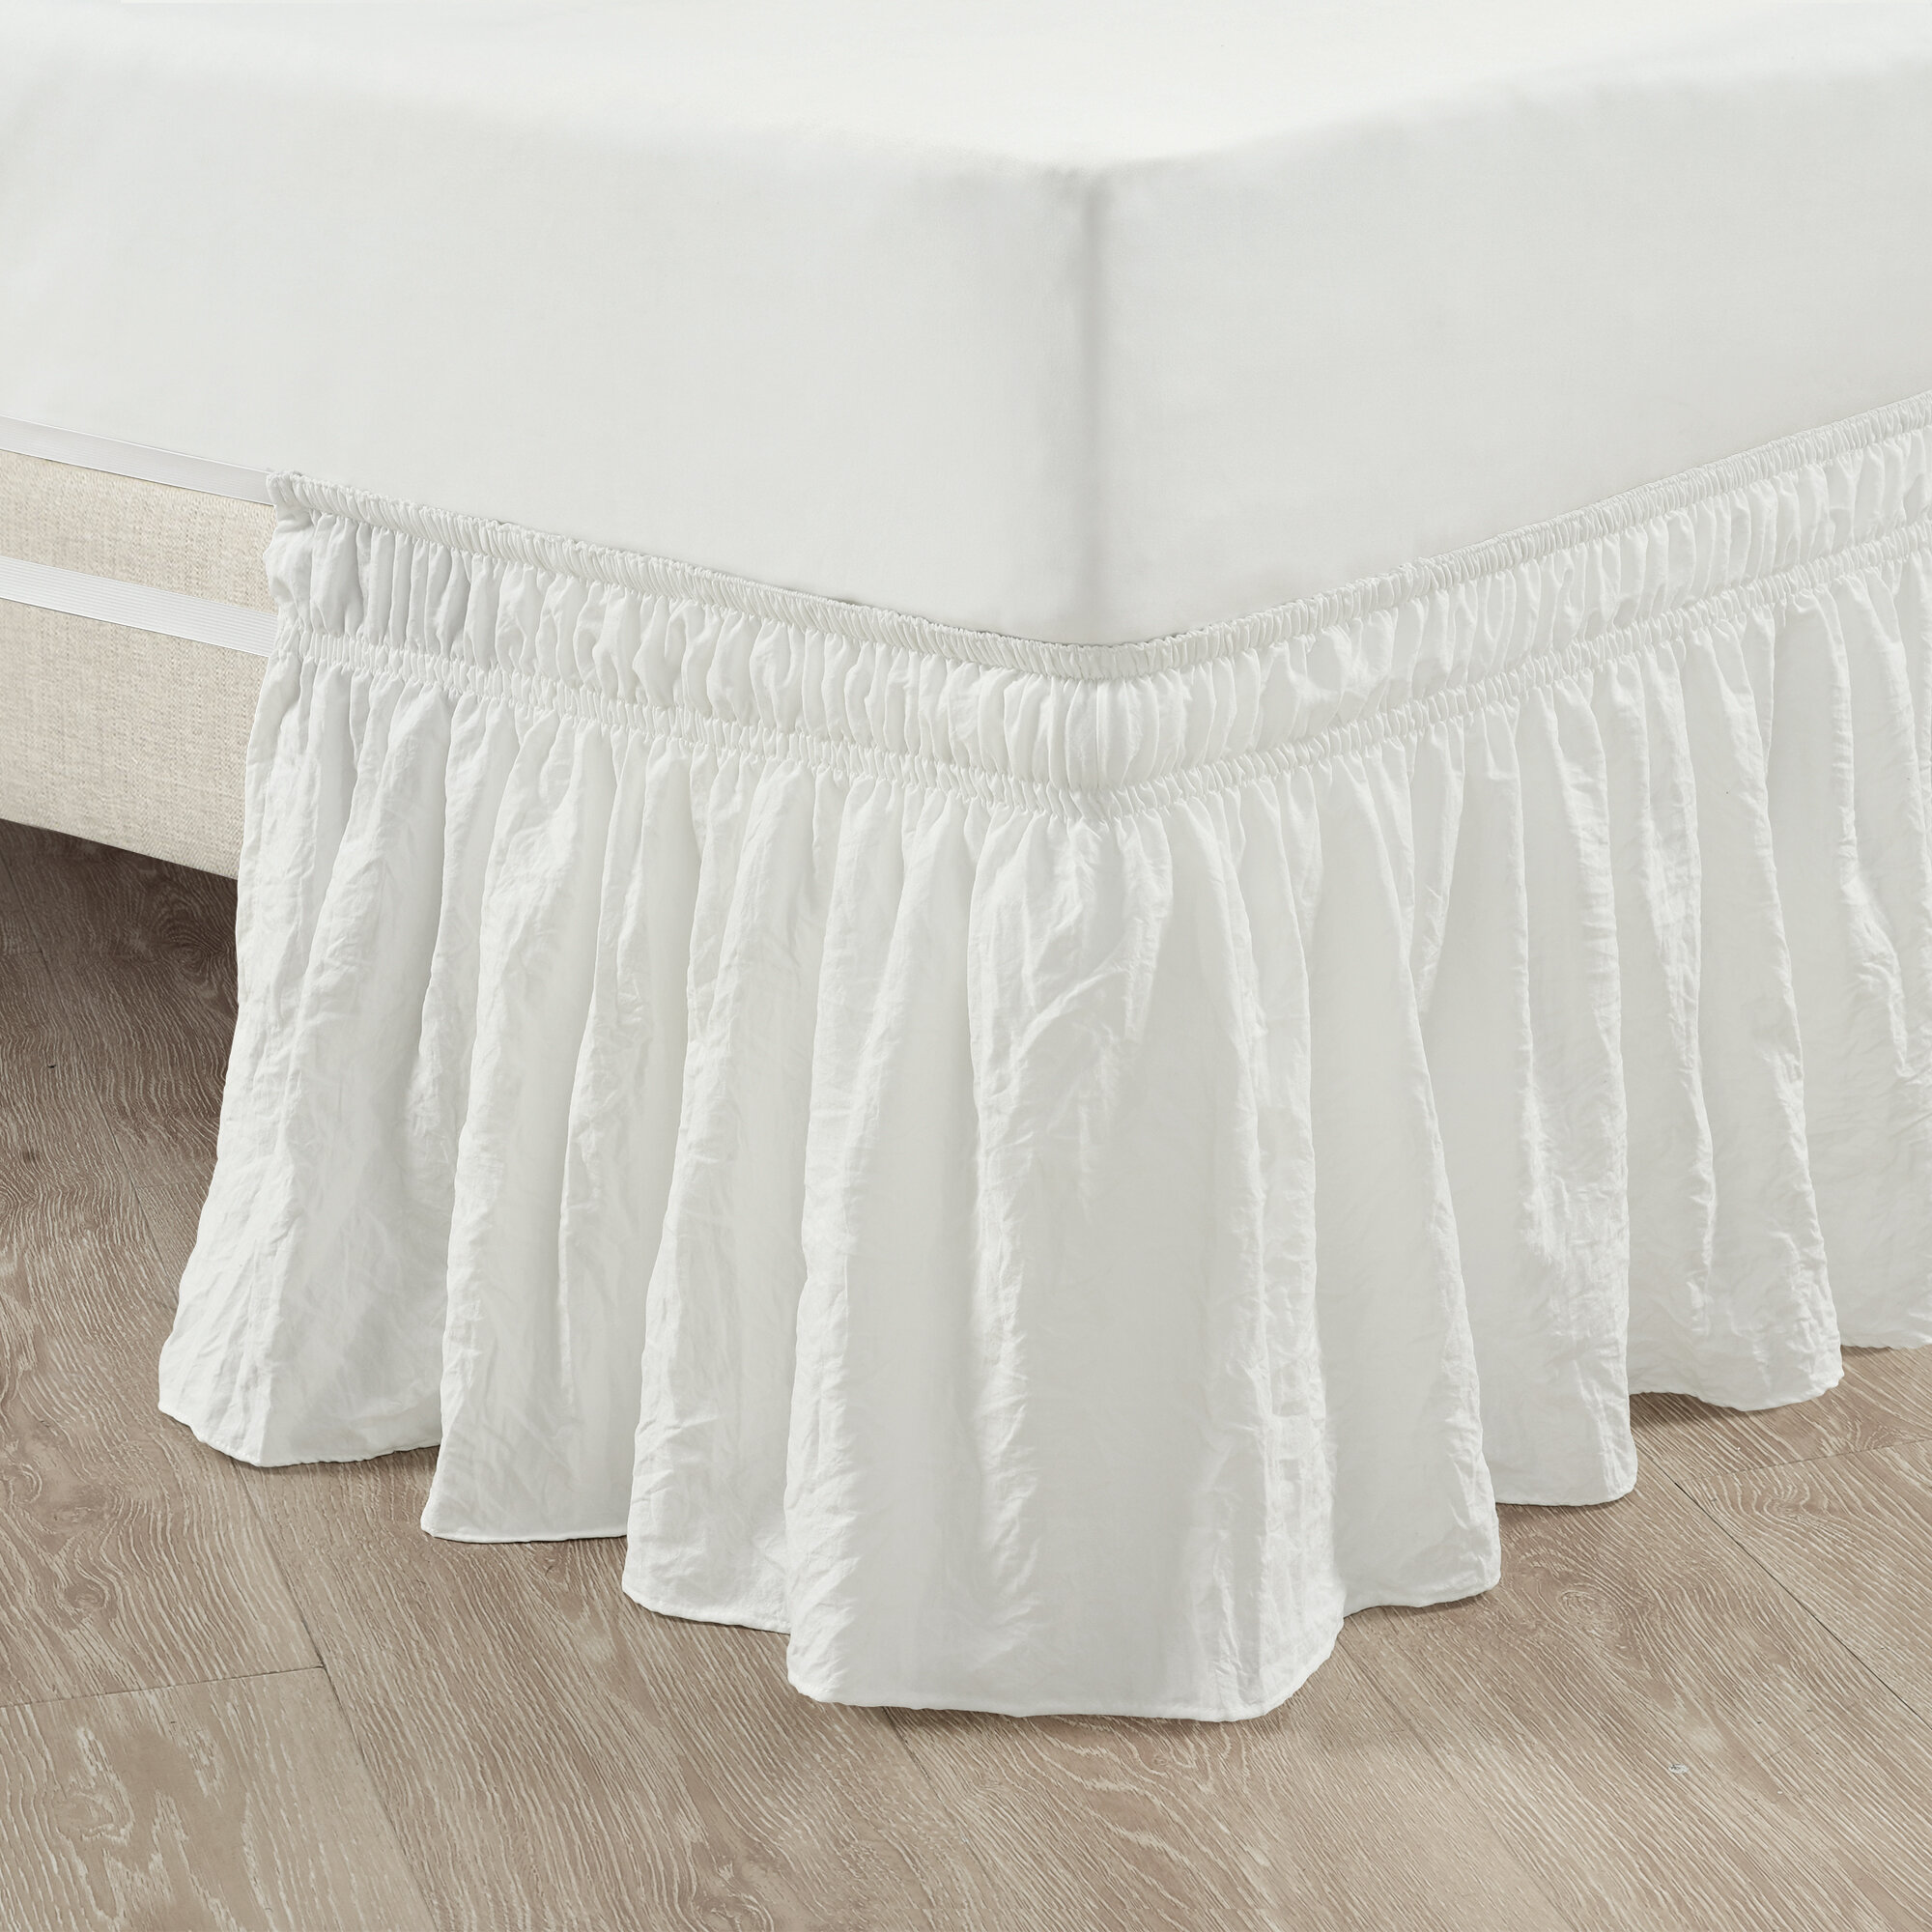 Elastic Bed Skirt Cover Dust Ruffle Wrap 14" Drop Twin Full Queen King 20 Colors 